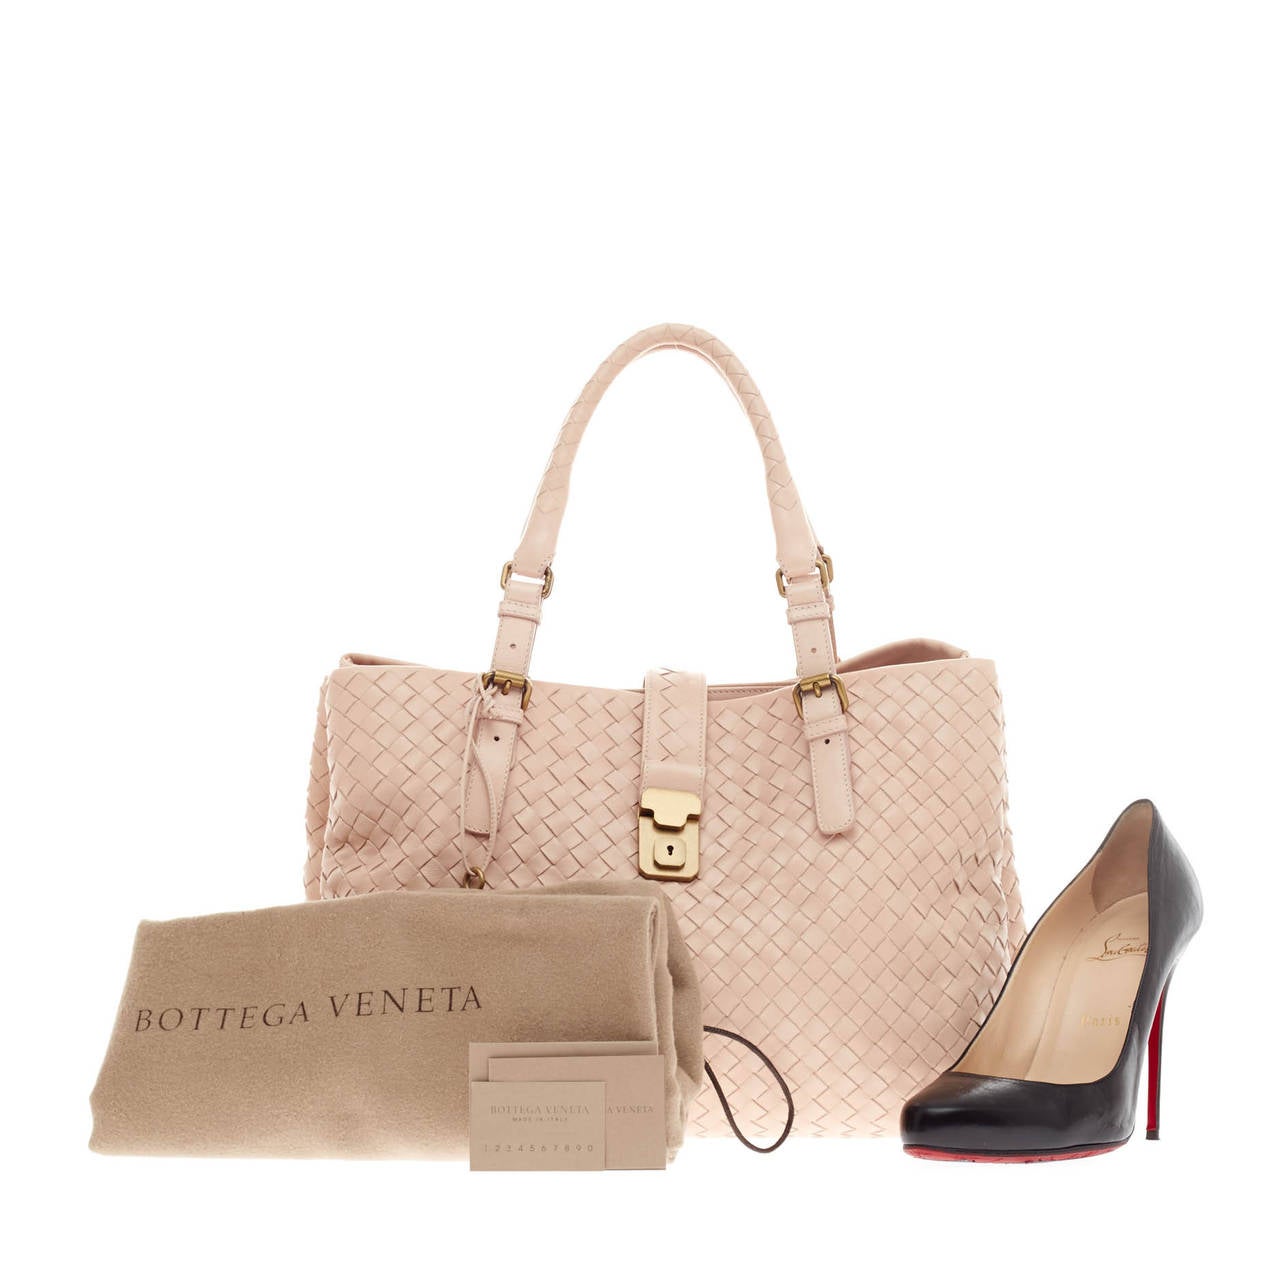 This authentic Bottega Veneta Roma Intrecciato Nappa Large in Pale Pink is a finely crafted tote that exudes an understated elegance. Made from calf leather woven in Bottega Veneta's signature intrecciato method, this functional and feminine tote